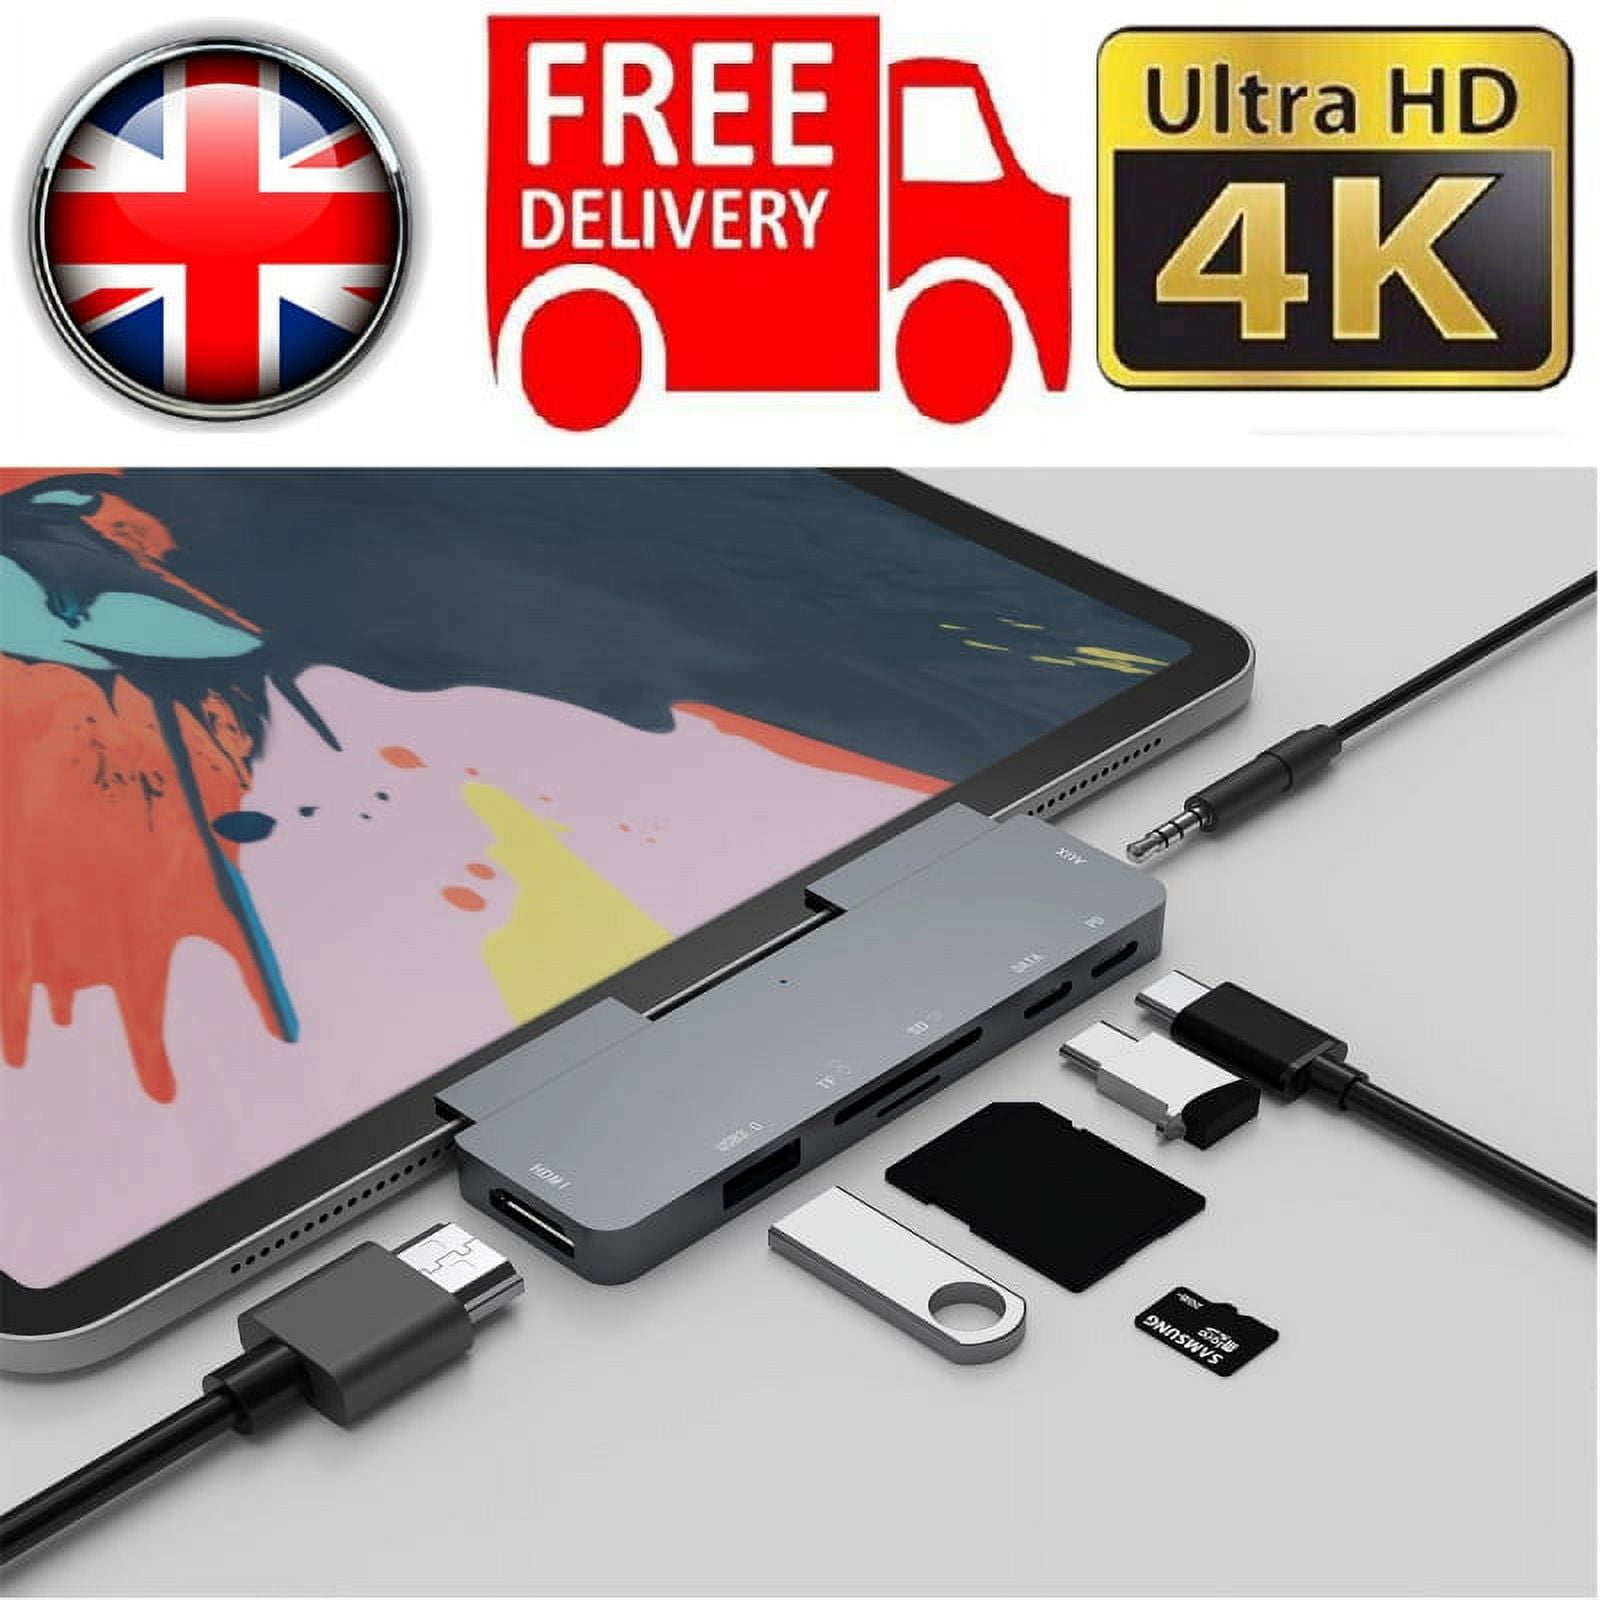 7 in 1 USB C Hub Stand Multiport Adapter with 4K@30Hz HDMI 60W PD SD/TF USB  3.0 Jack Adjustable Bracket Hub for iPad Pro Chrome